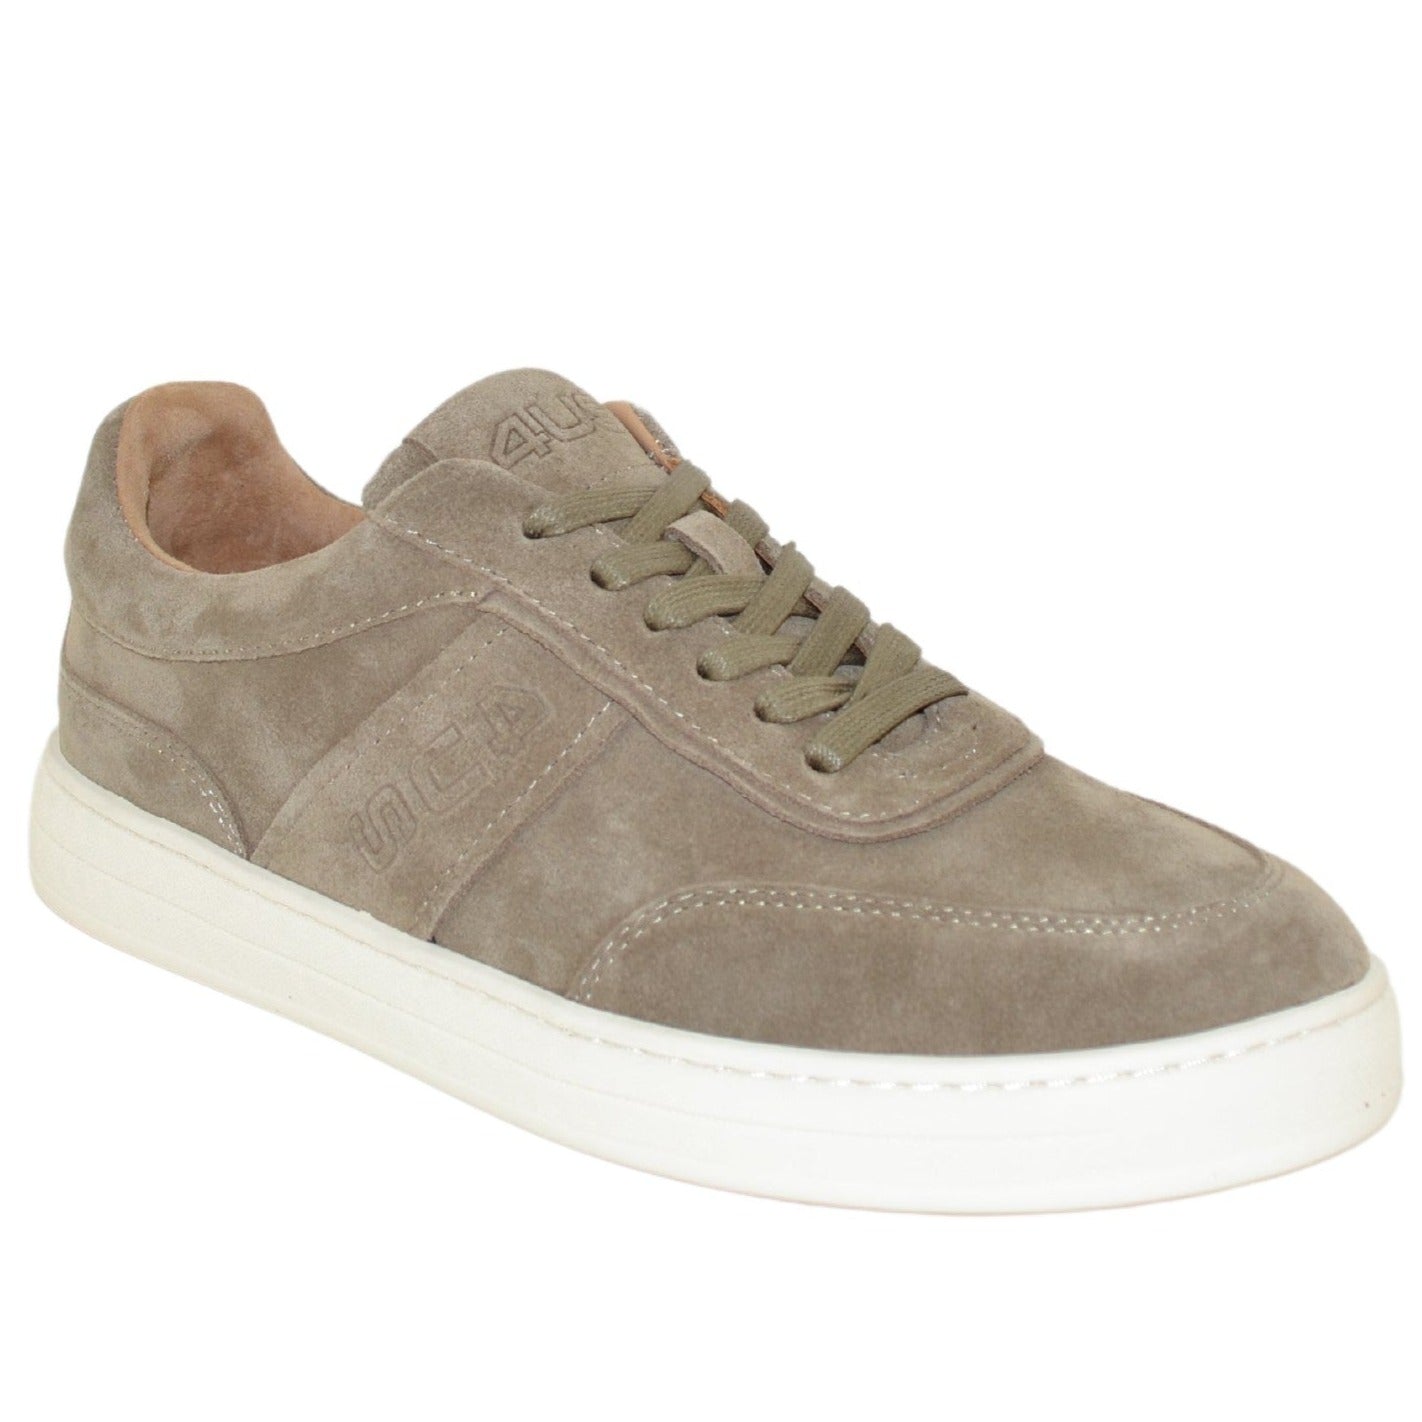 Sneakers Cesare Paciotti 4us man taupe suede leather